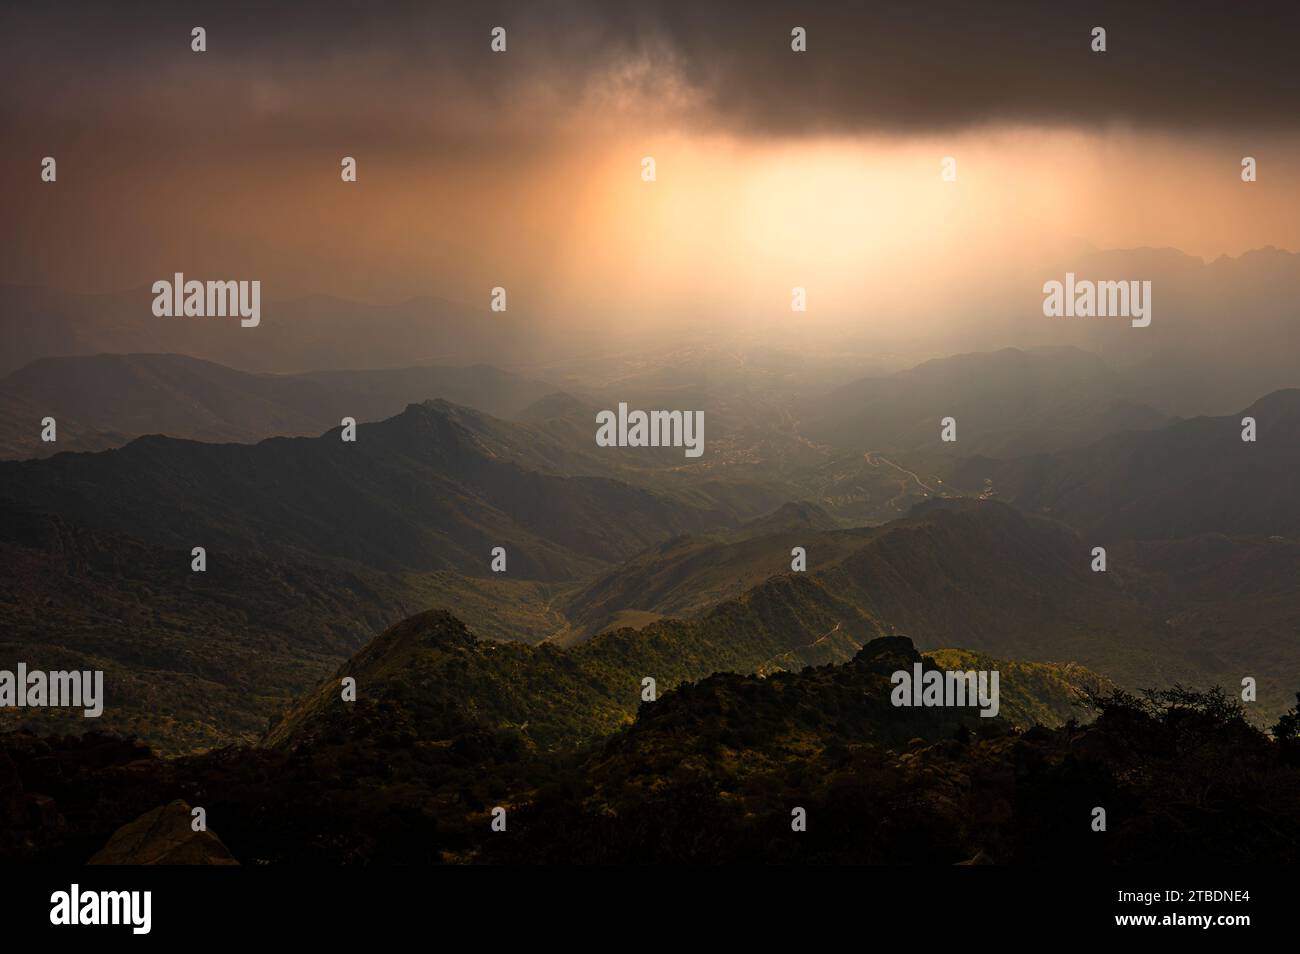 Dramatic and picturesque mountain landscape. Sunset from Jabal Mareer. The Sarawat Mountains, Saudi Arabia. Stock Photo